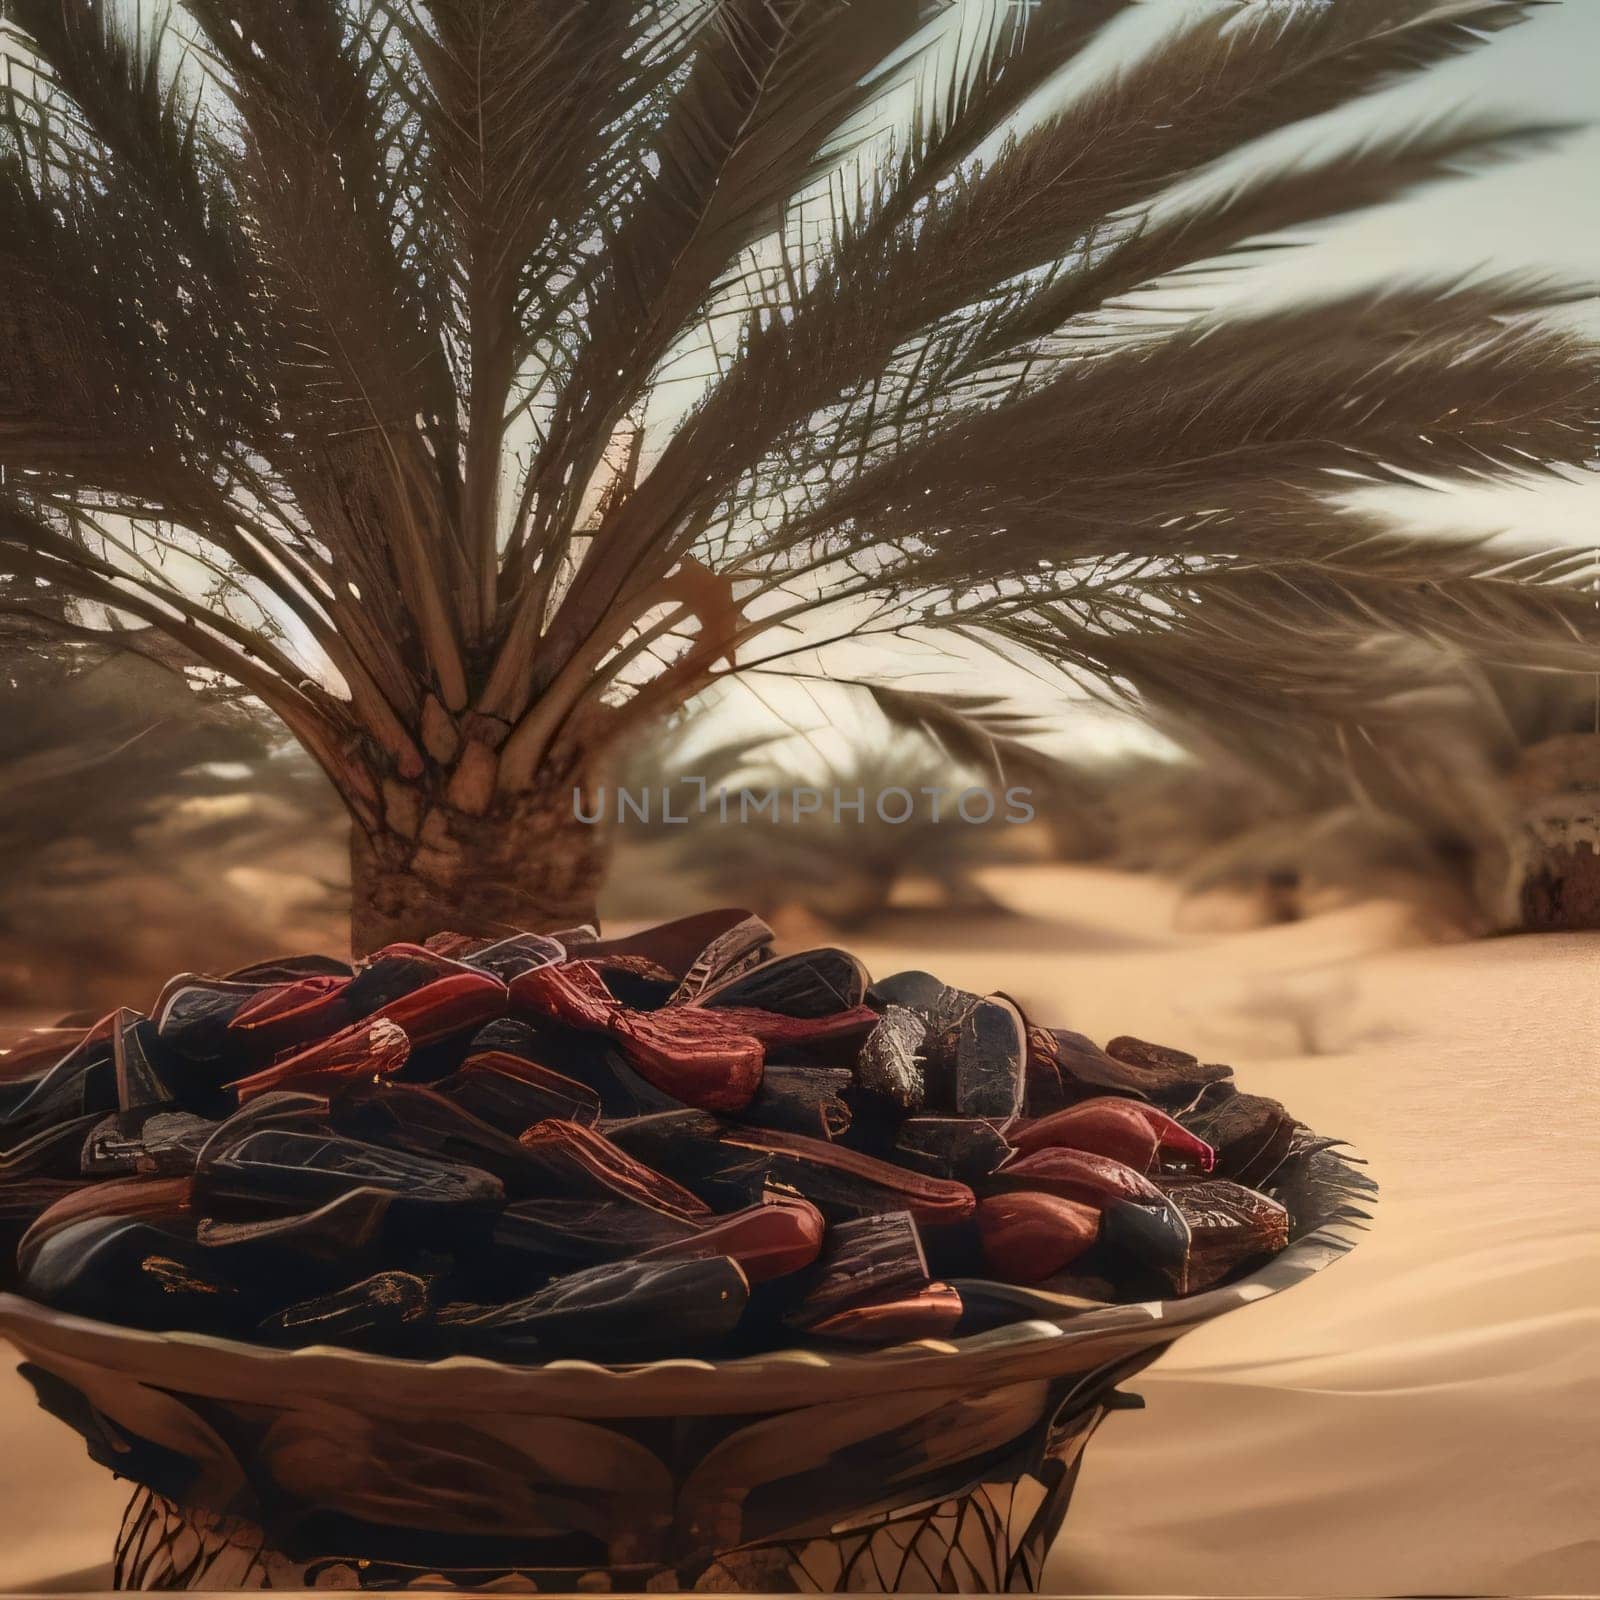 A bowl full of raisins dried grapes in the desert against a background of palm trees. Ramadan as a time of fasting and prayer for Muslims.A time to meet with God.